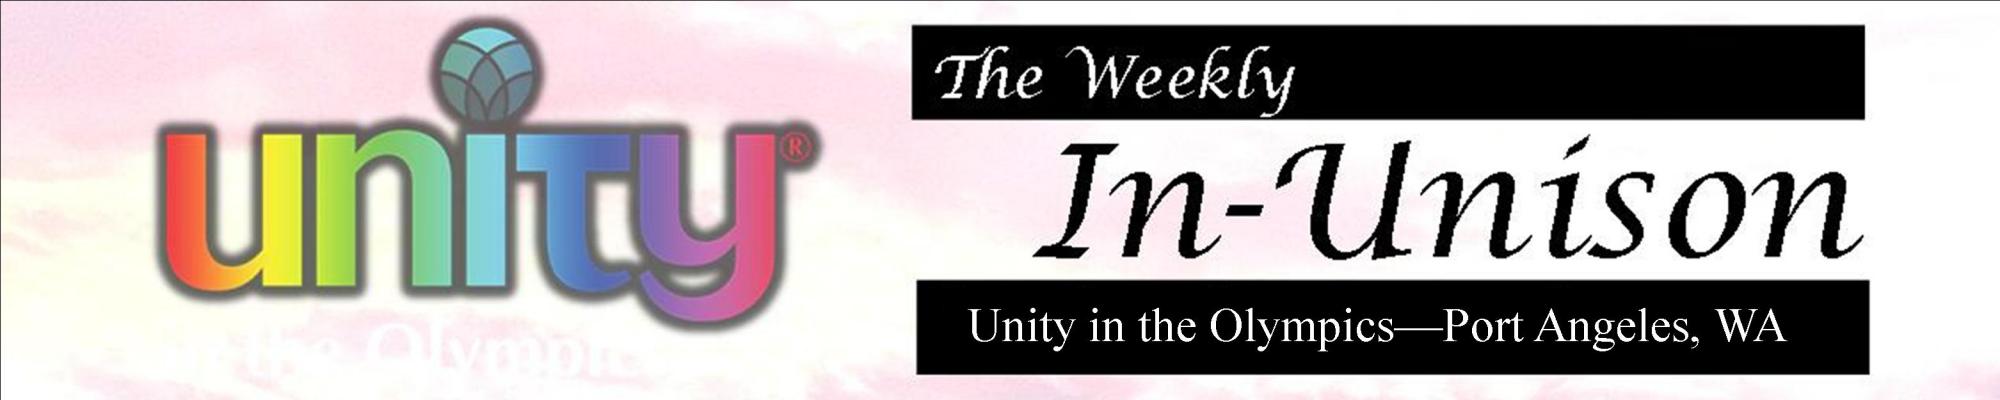 The Weekly IN-UNISON March 6, 2024 Edition